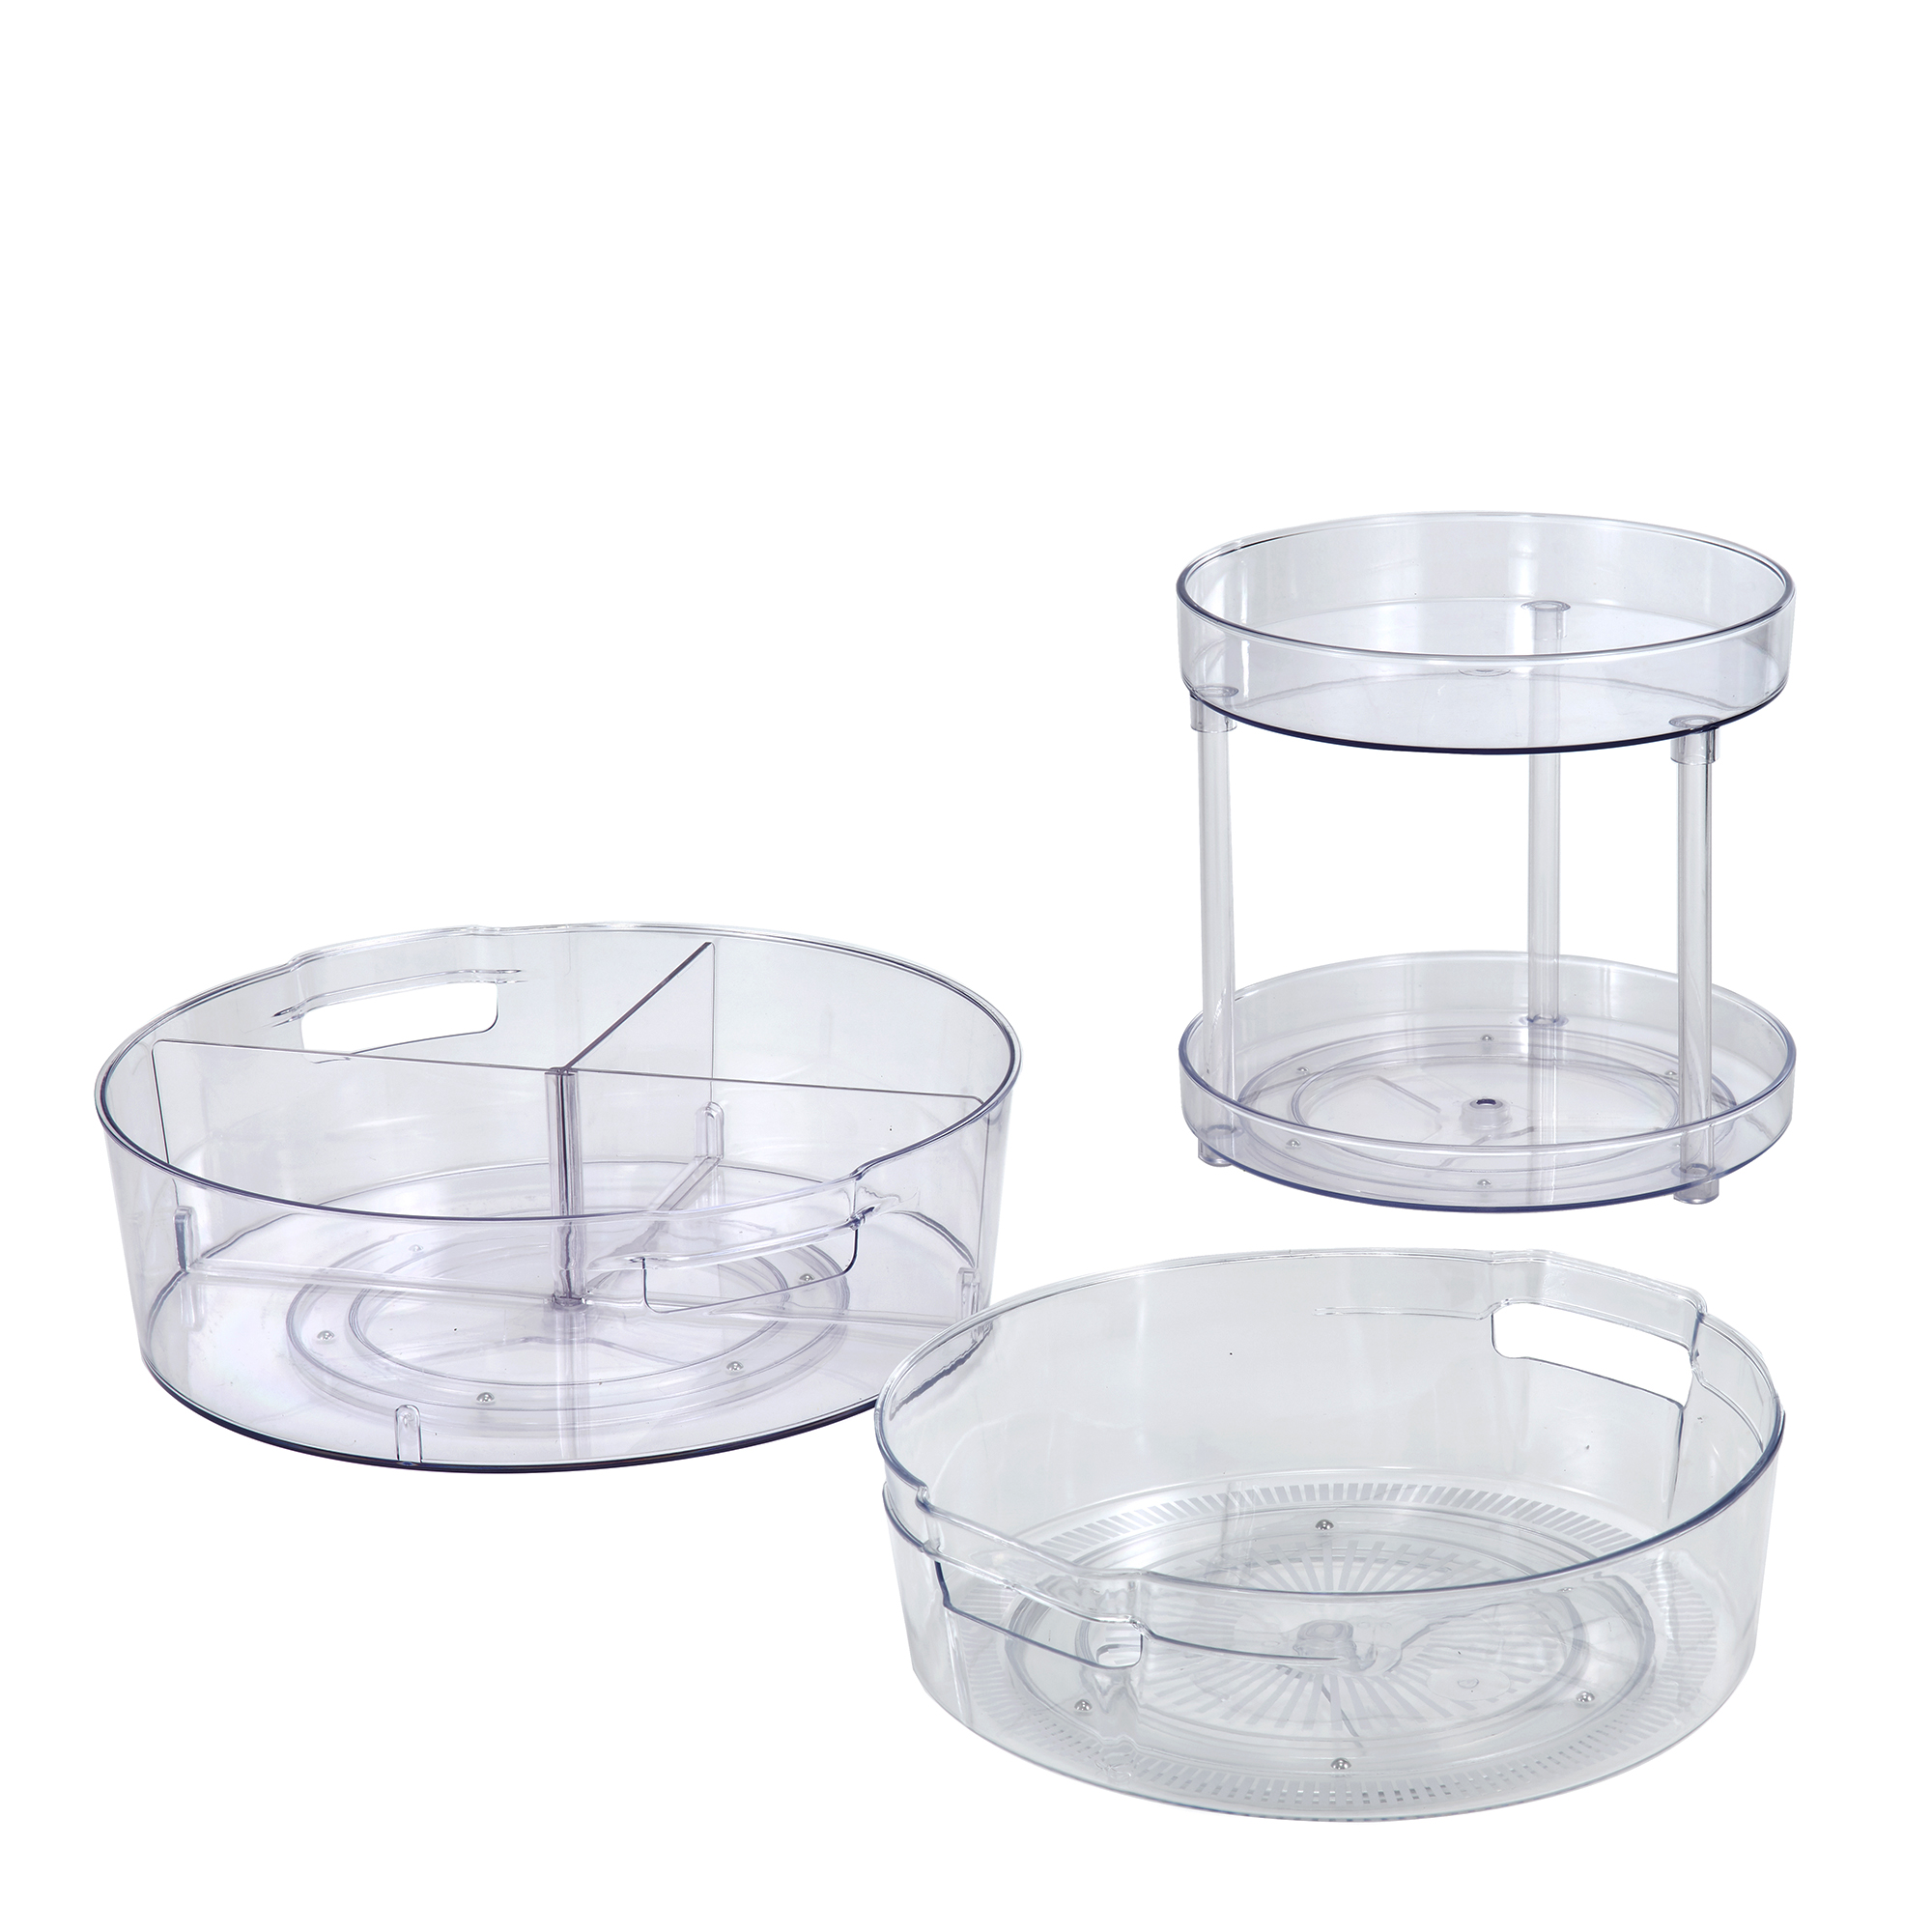 Mainstays Clear Plastic Turntable Set 3-Pack Set, Various Sizes - image 1 of 6